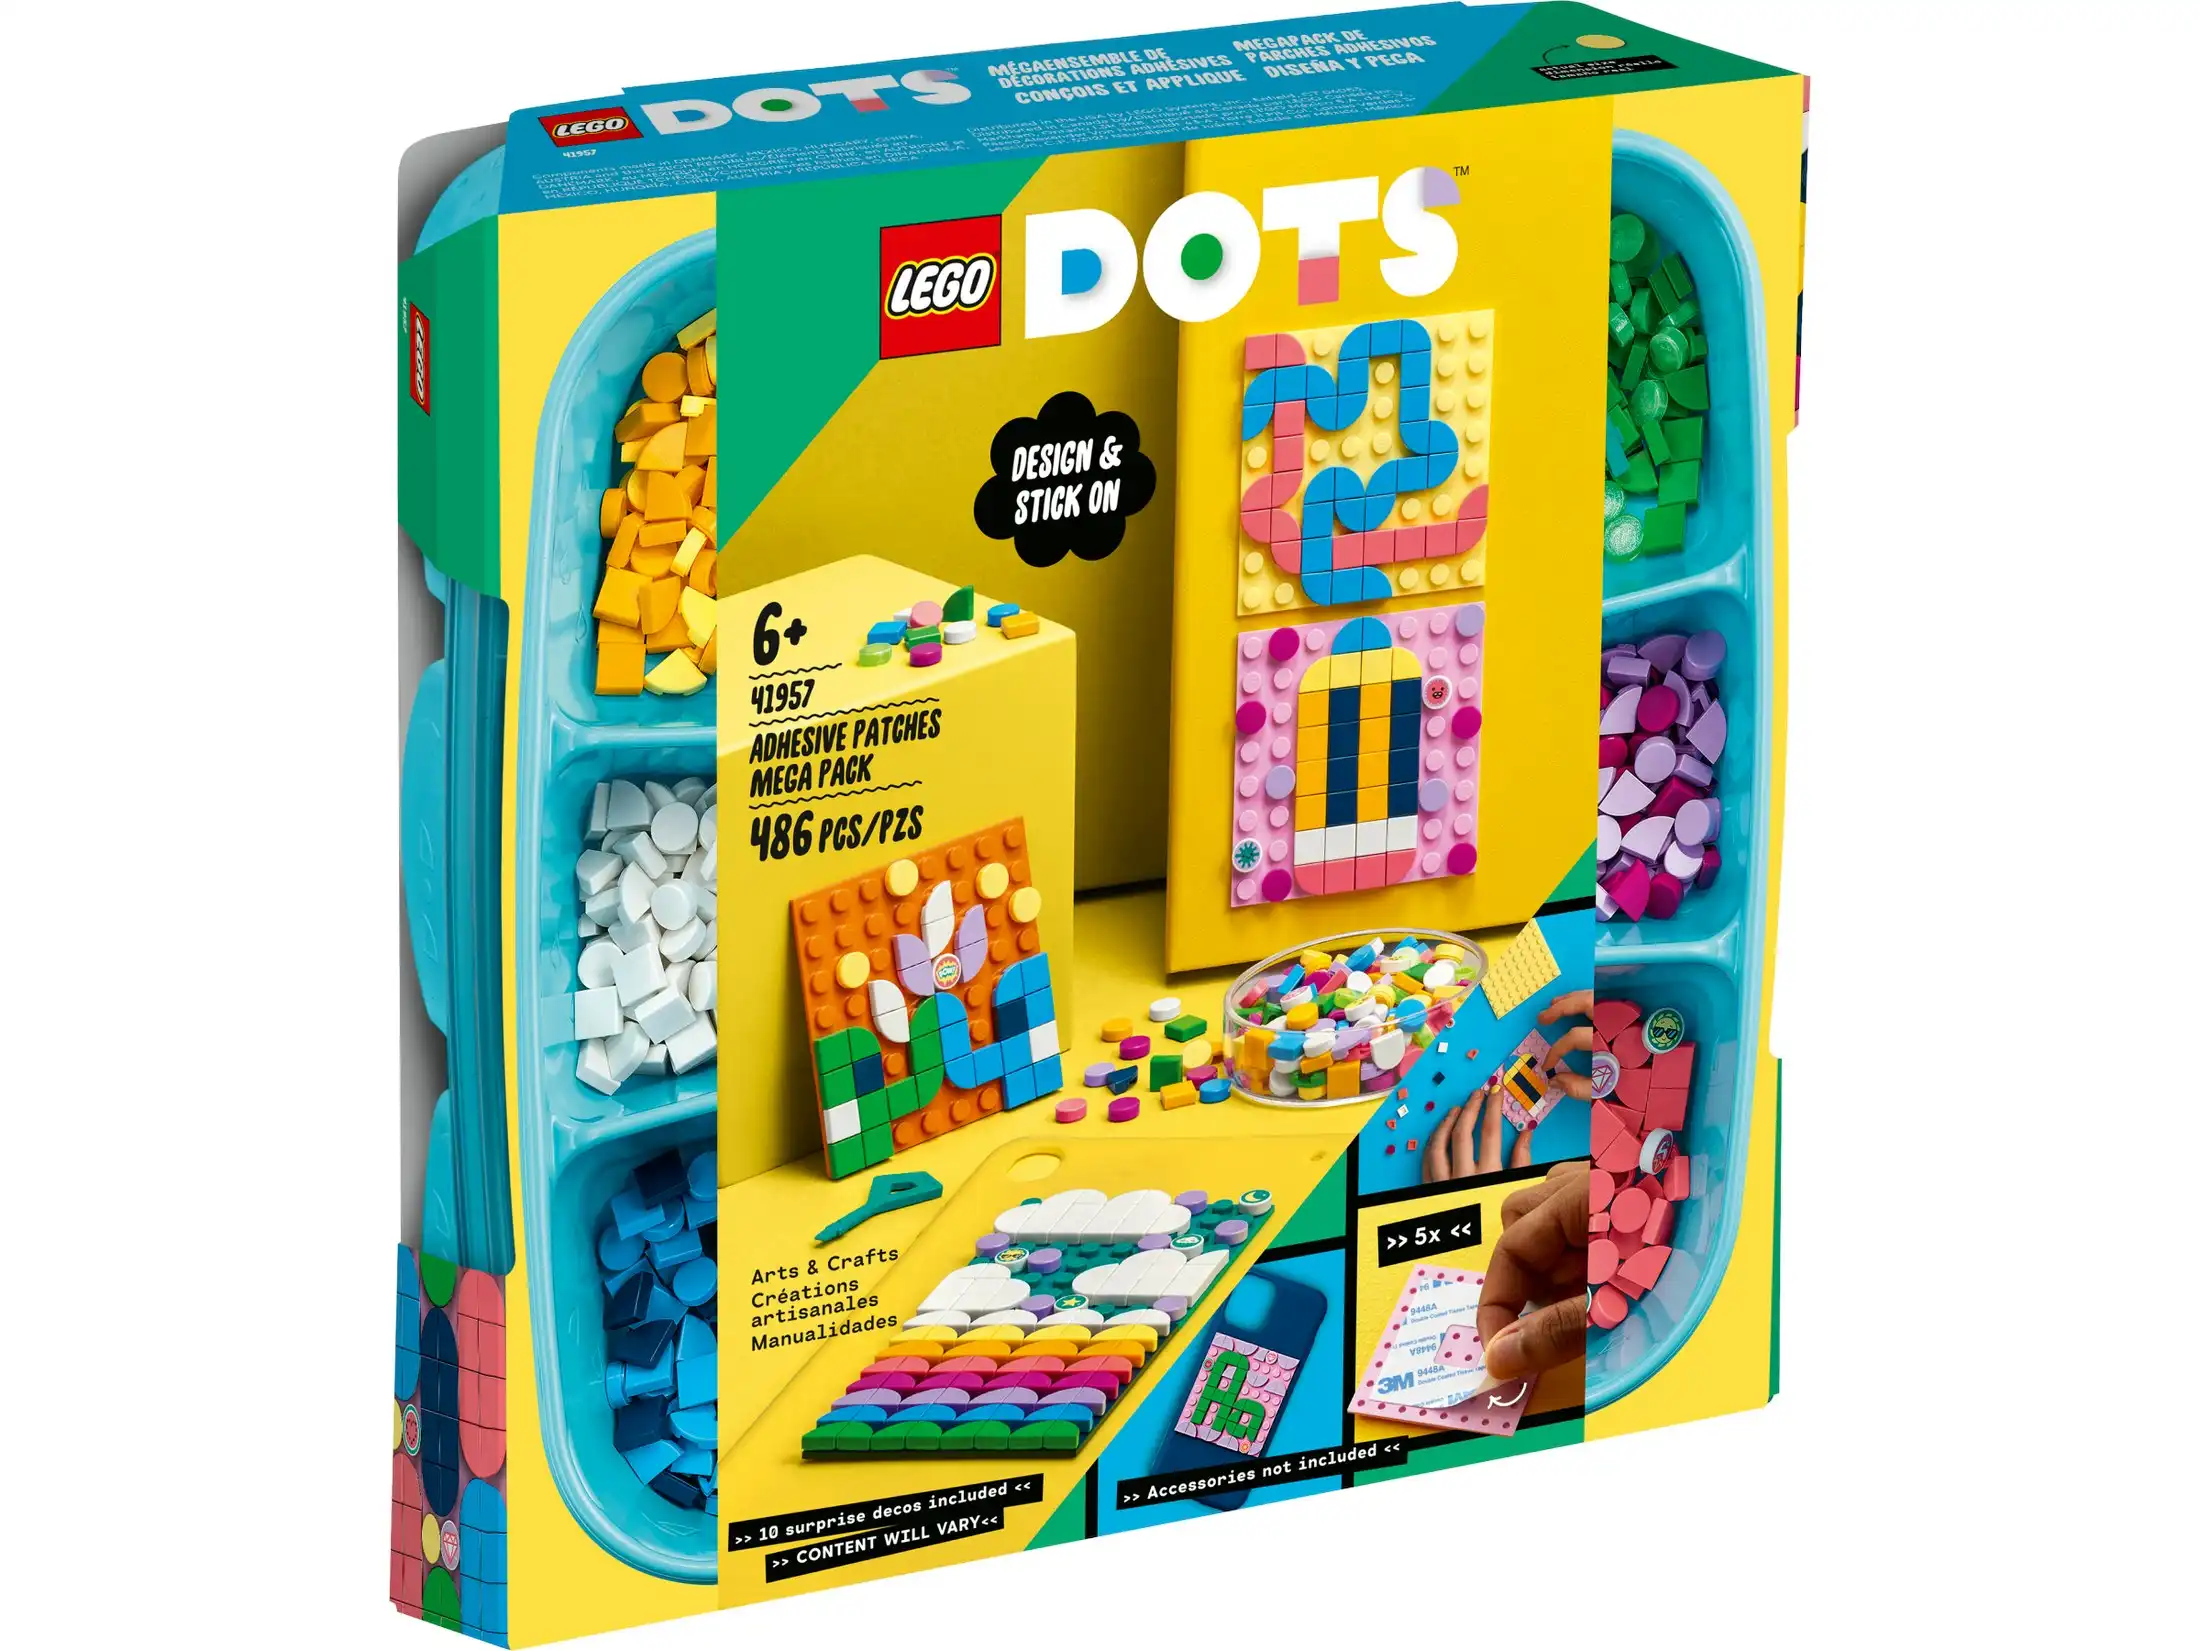 LEGO 41957 Adhesive Patches Mega Pack - DOTS